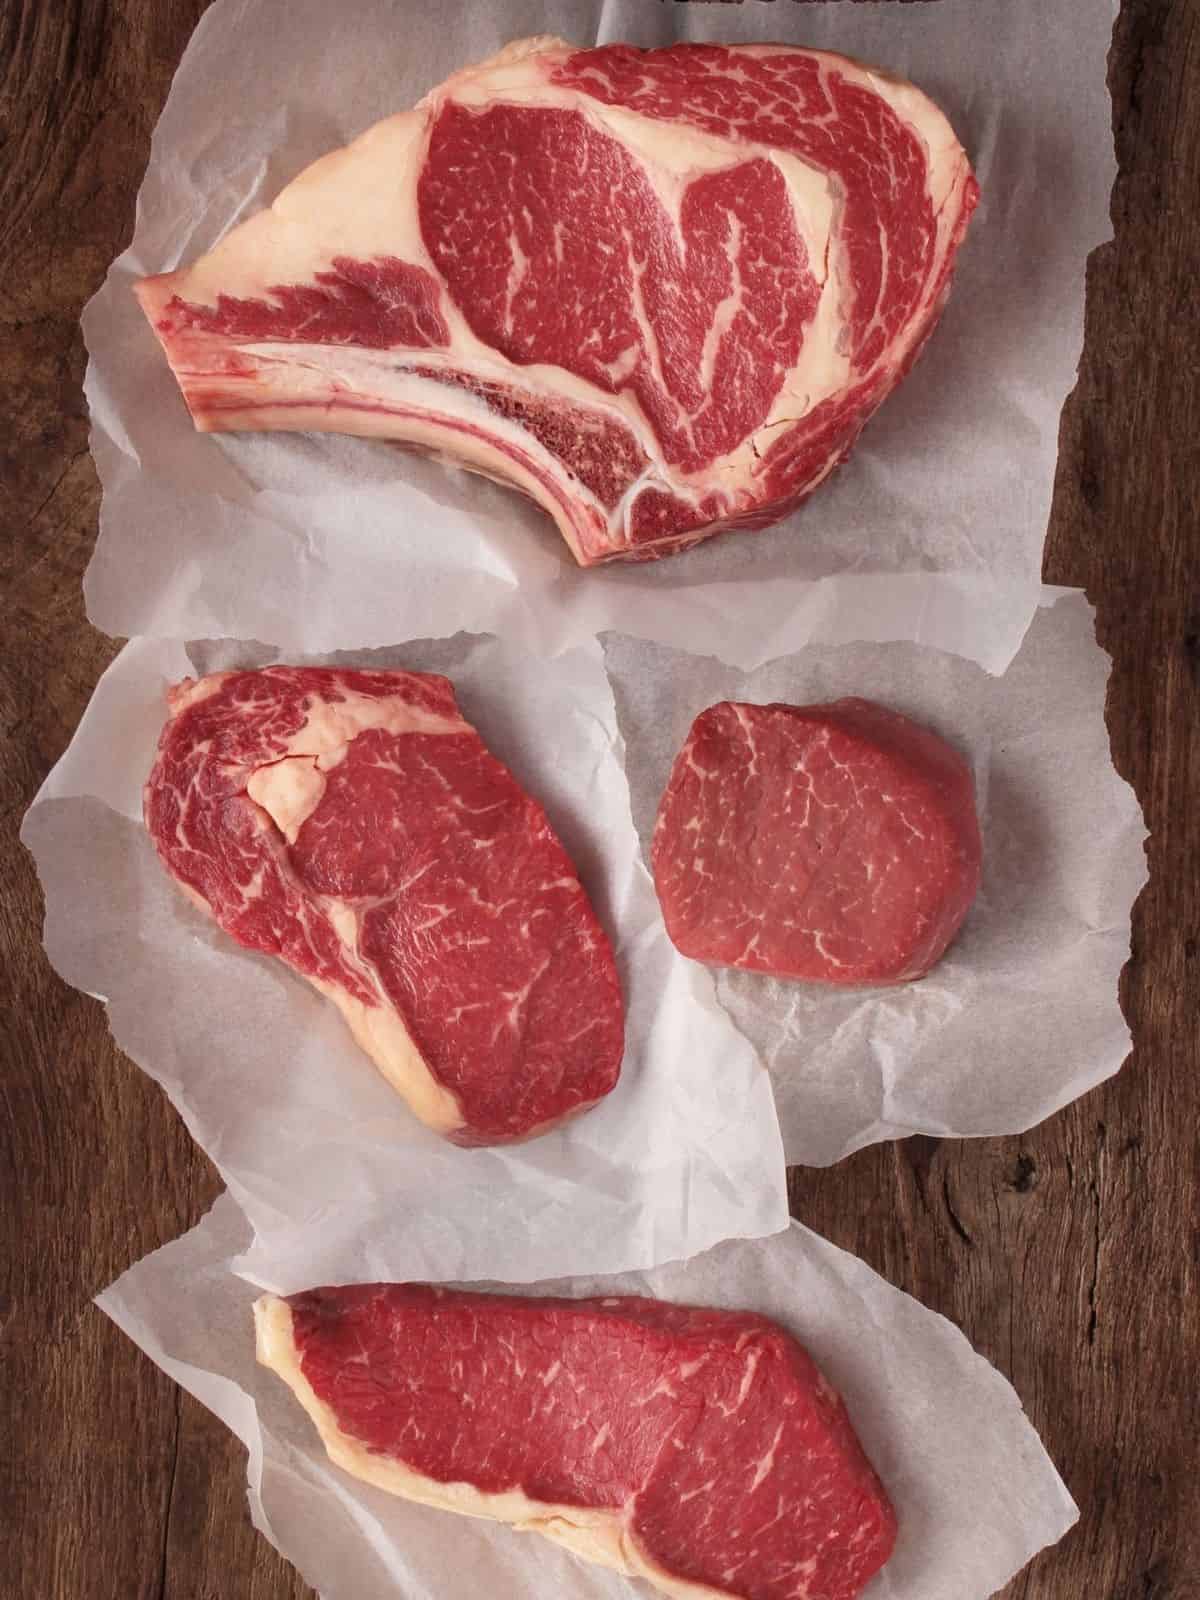 Different types of meat cuts.